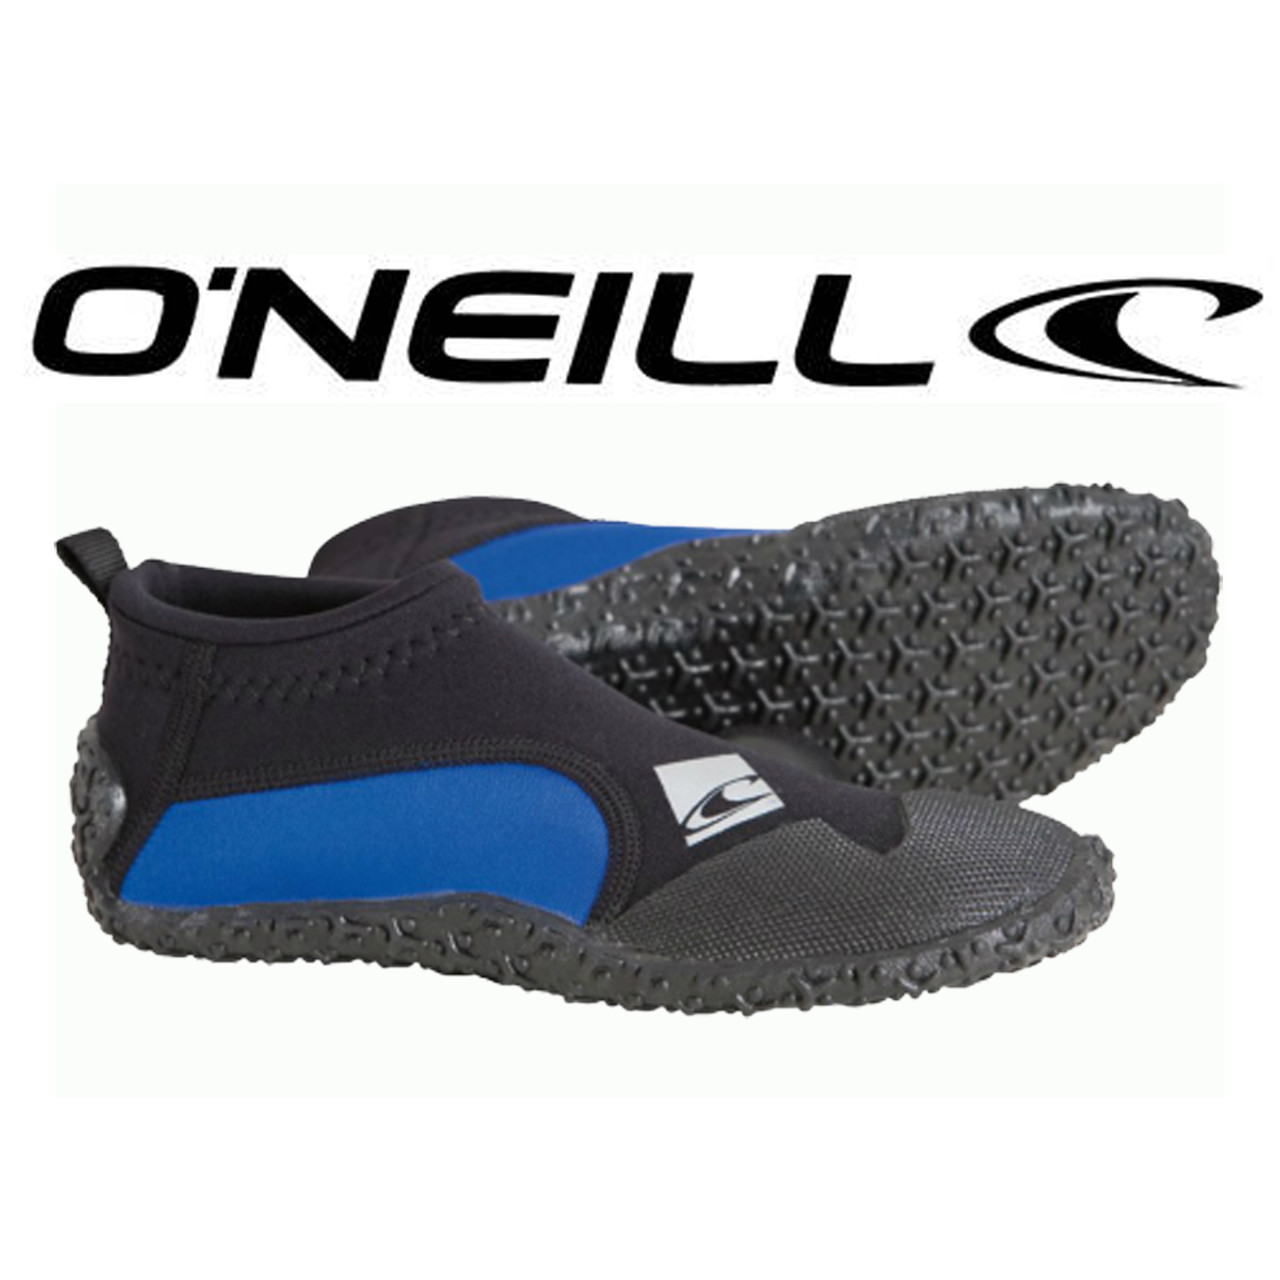 O'Neill Reactor Reef Water Shoe at RIDE THE WAVE